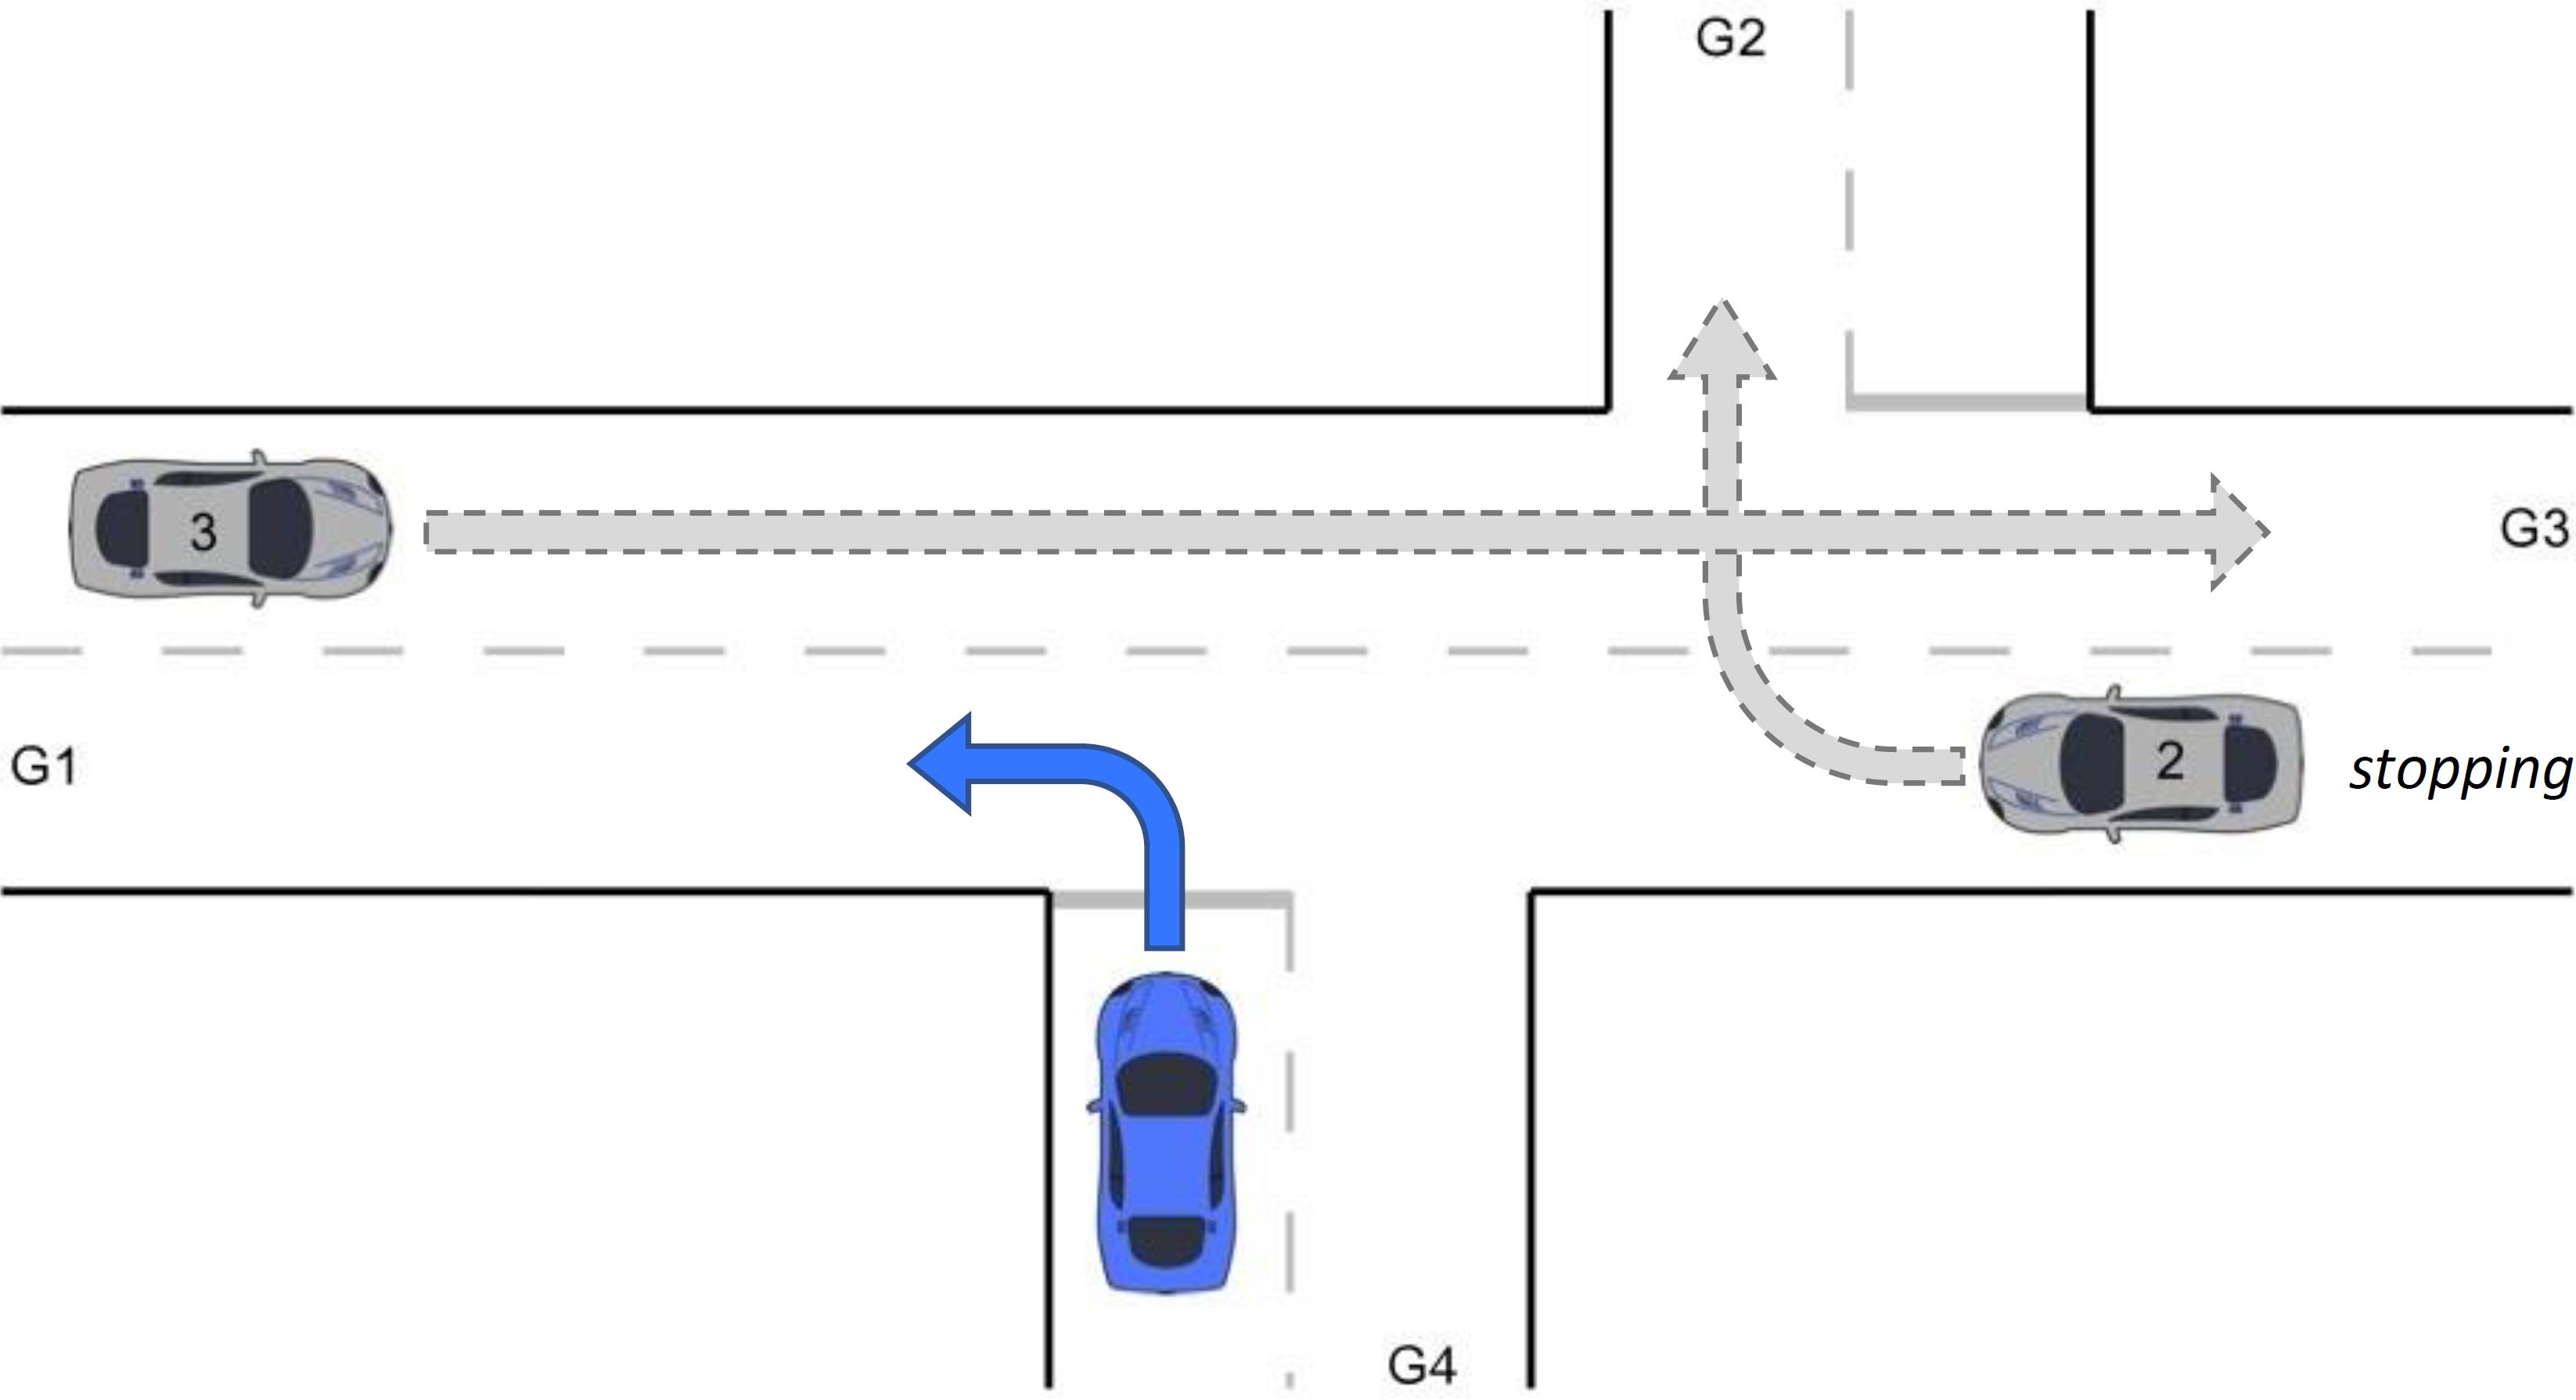 Top-down schematic view of three vehicles arriving at a junction with arrows indicating the direction of turns.